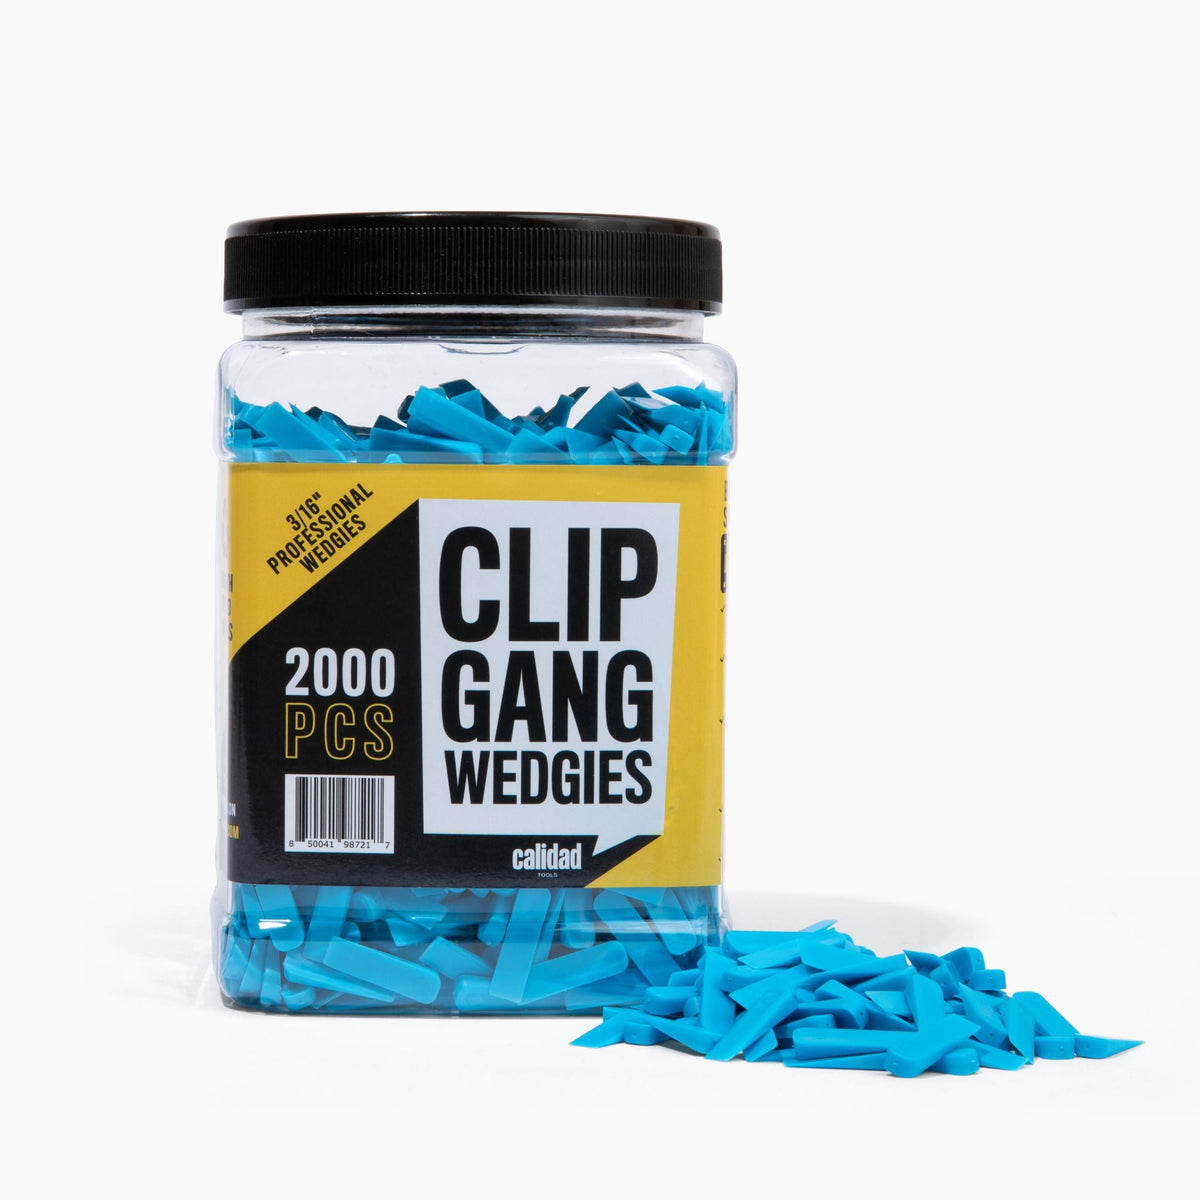 Clip Gang Tile Spacer Combo - Calidad Tools